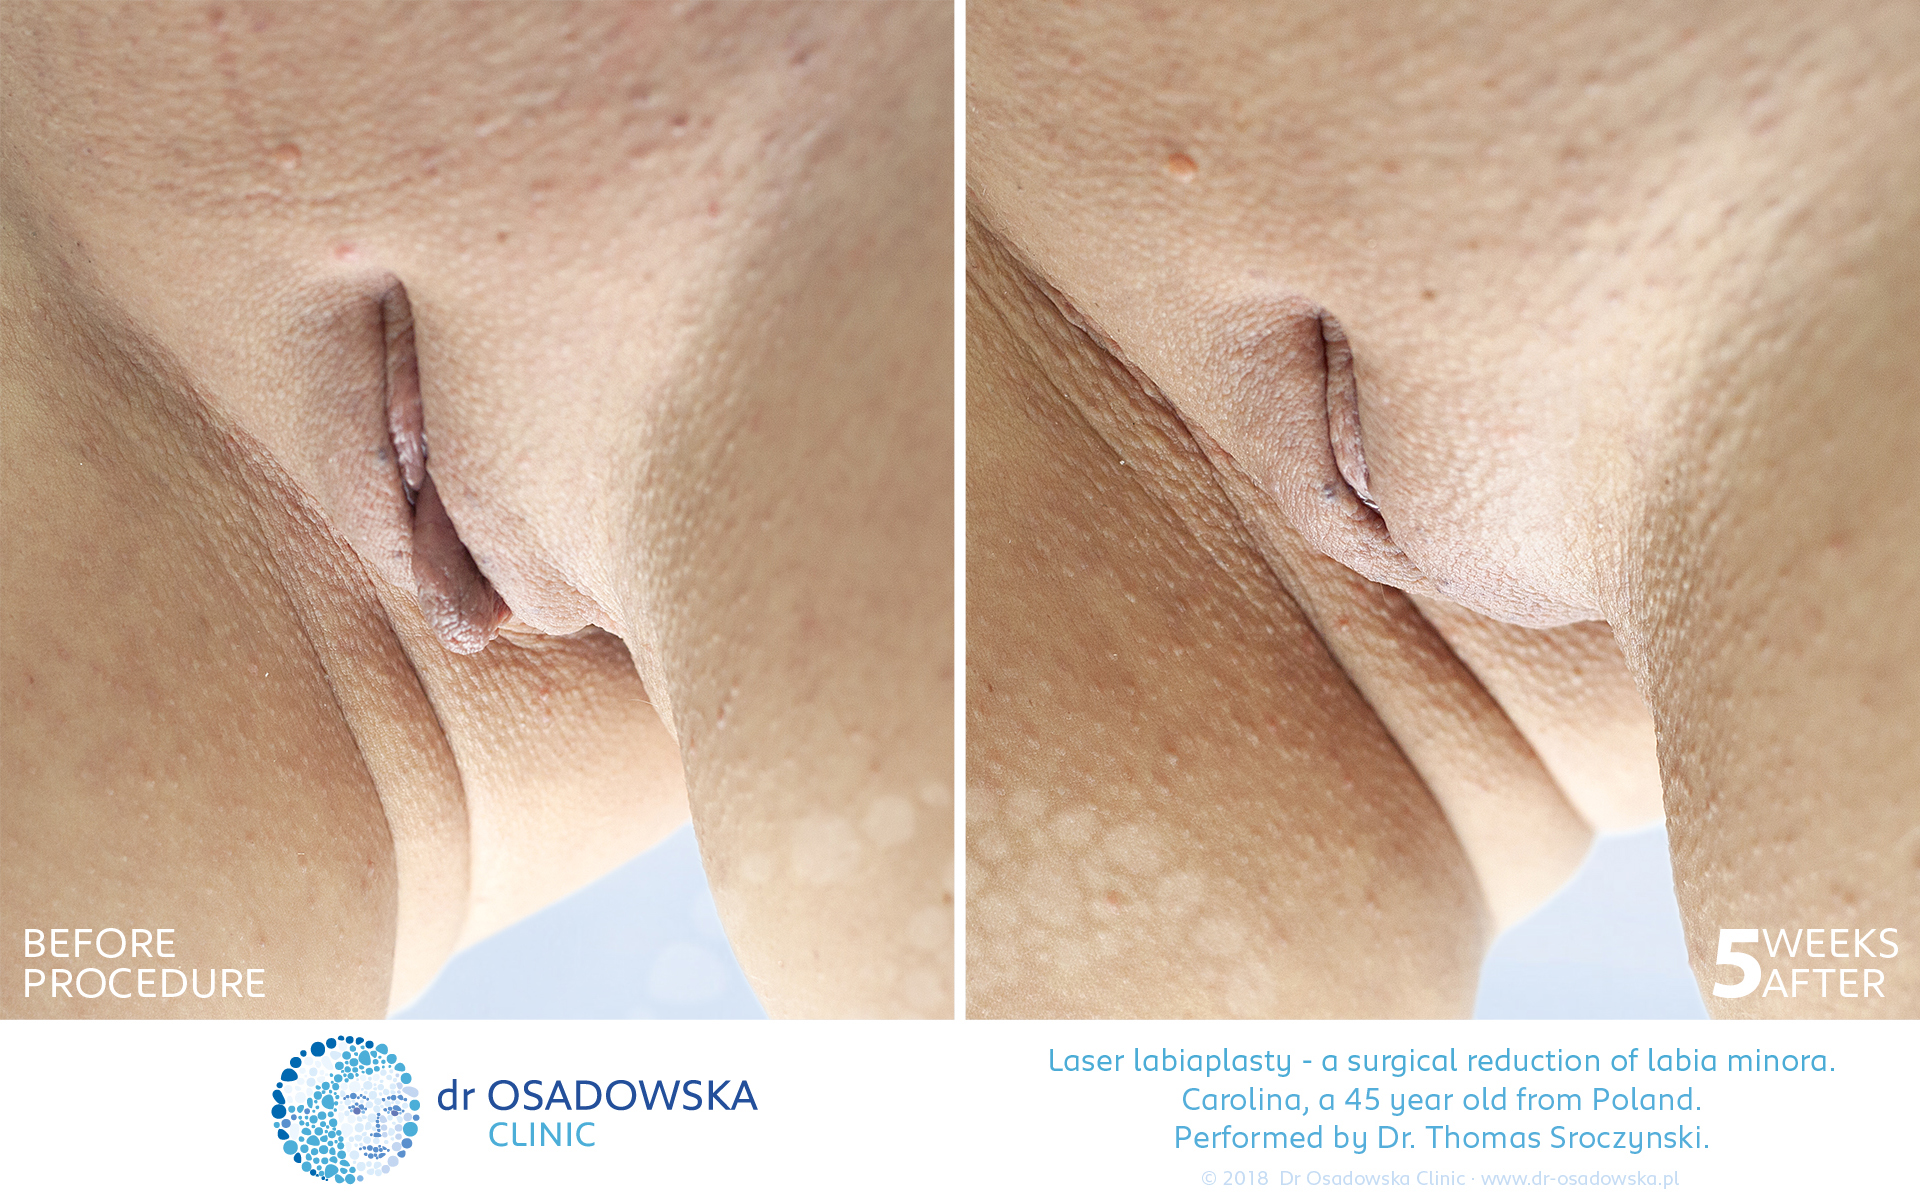 Laser Labiaplasty before and 5 weeks after. Carolina, 45 y.o. from Poland. View B